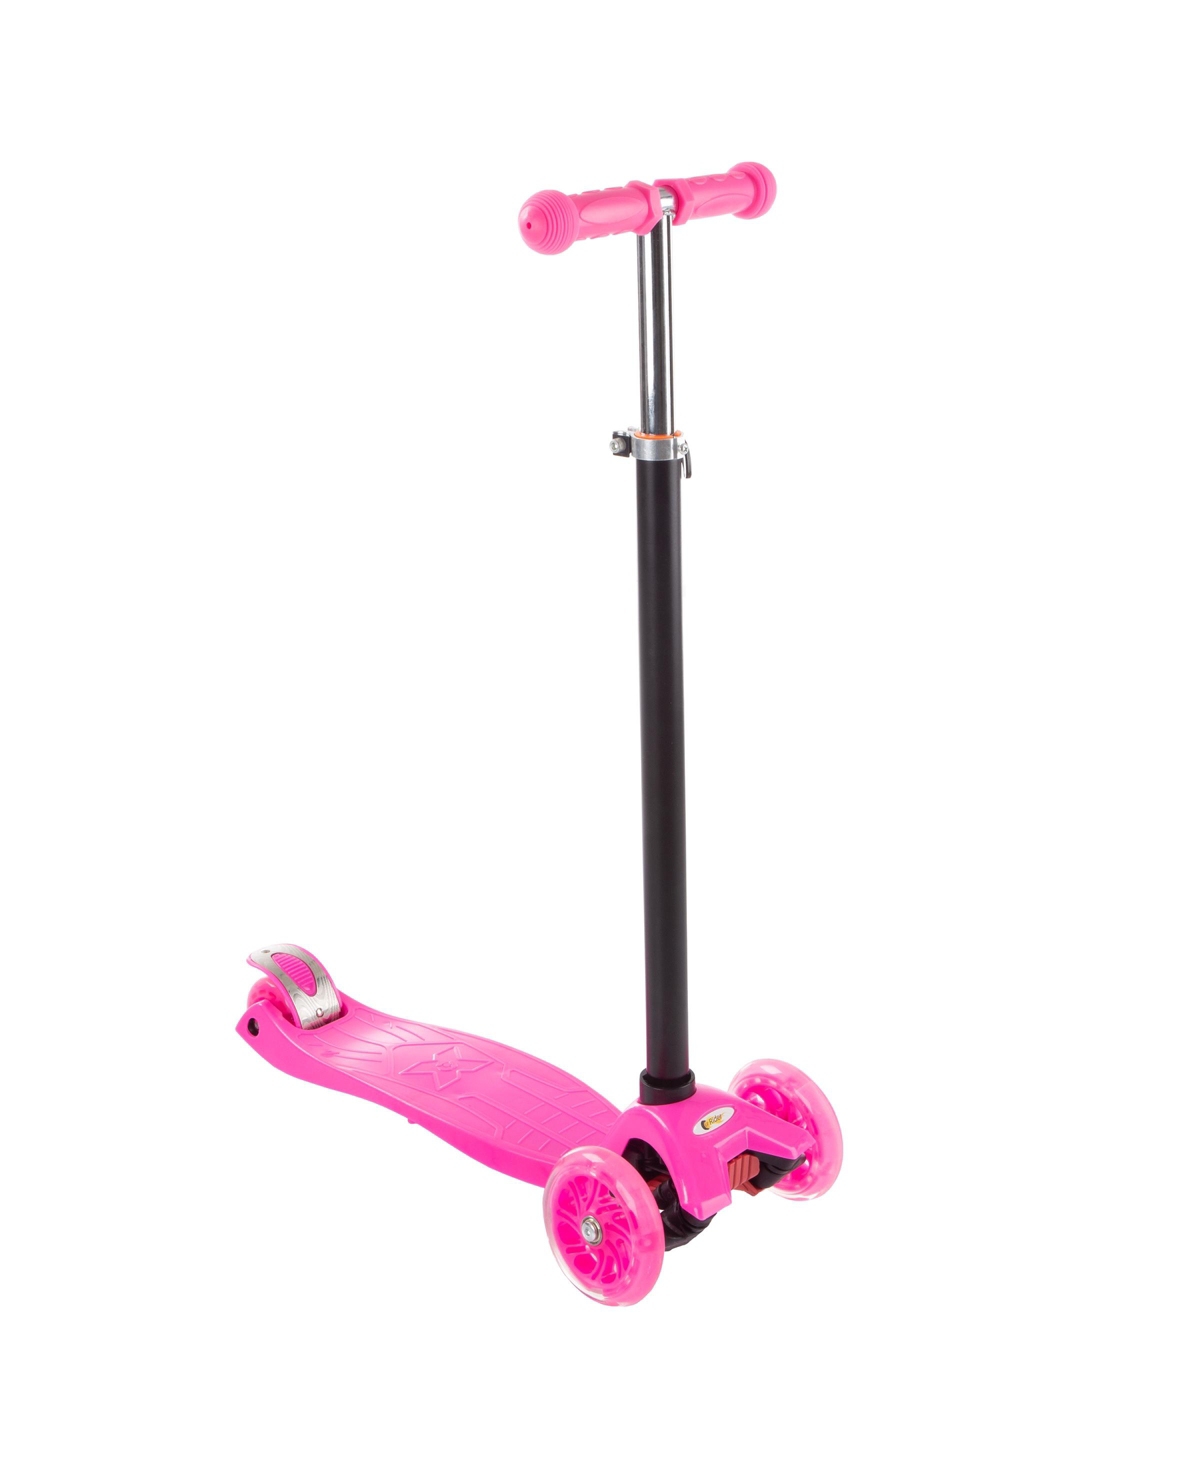 Lil' Rider Kids Scooter In Neon Pink